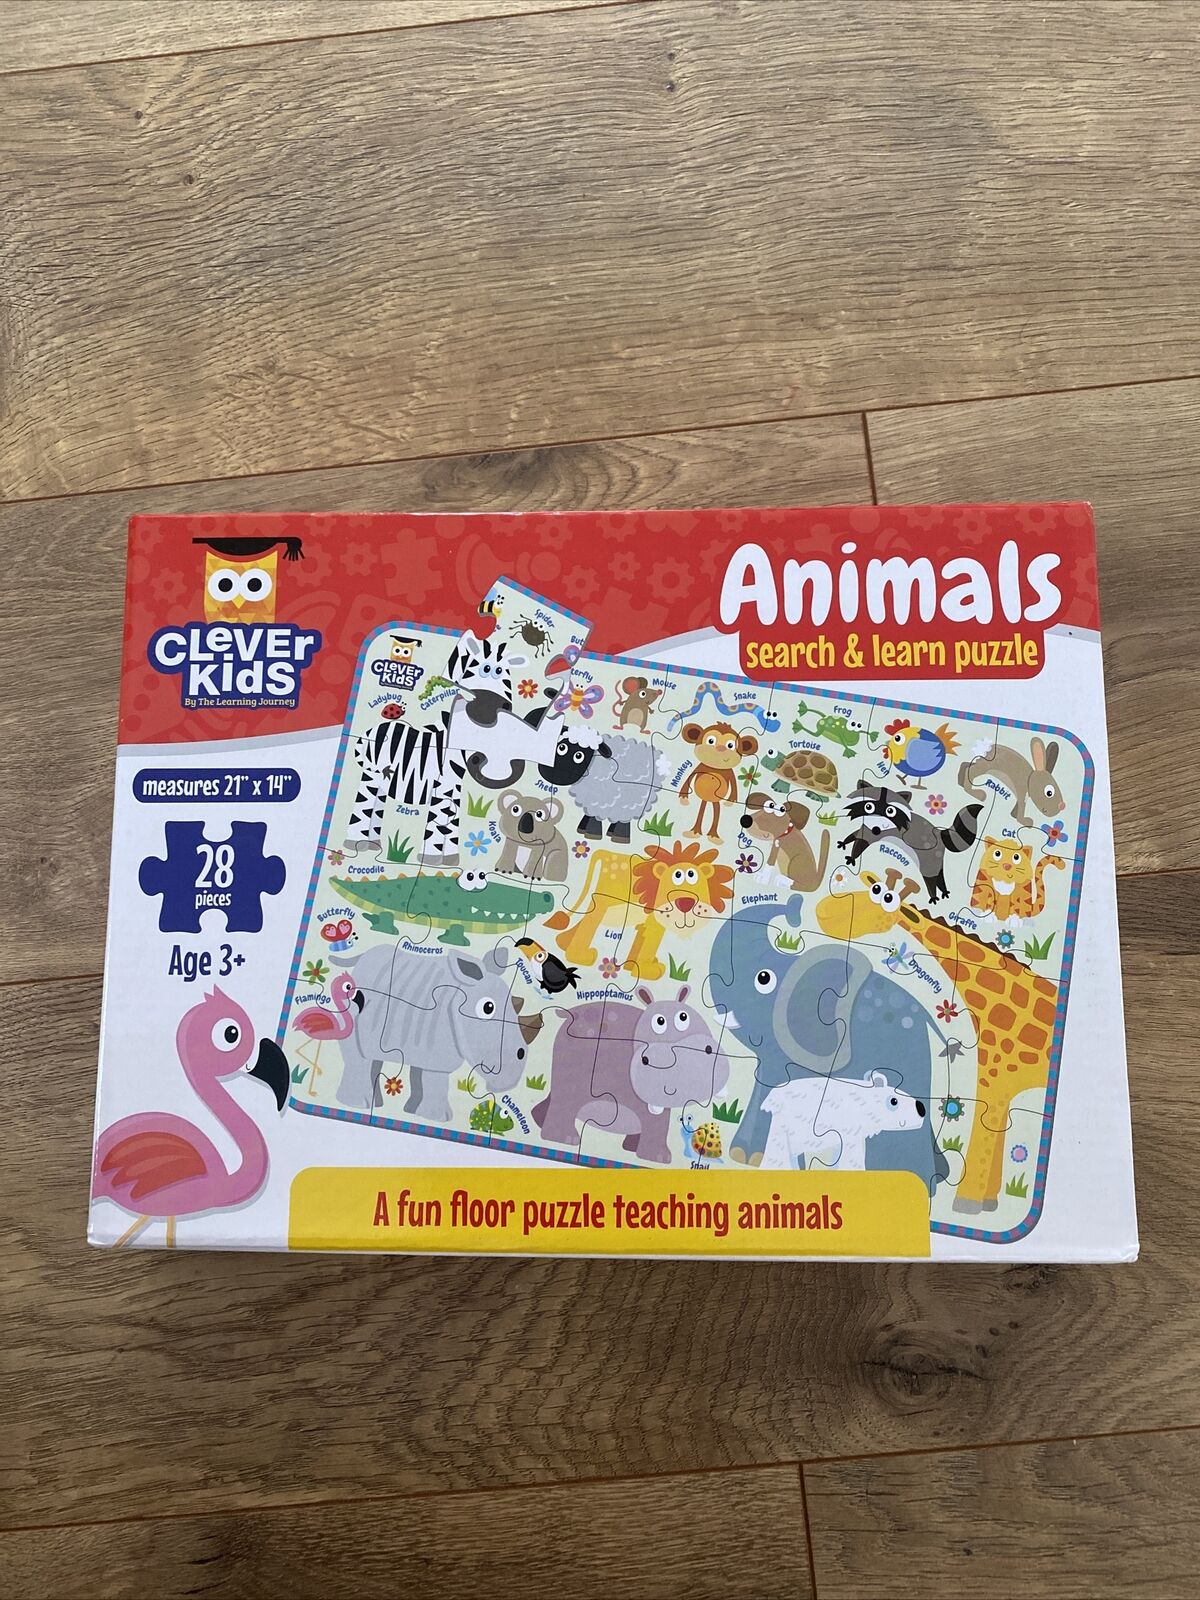 Animals Search & Learn Puzzle By Clever Kids - 28 Piece Floor Puzzle